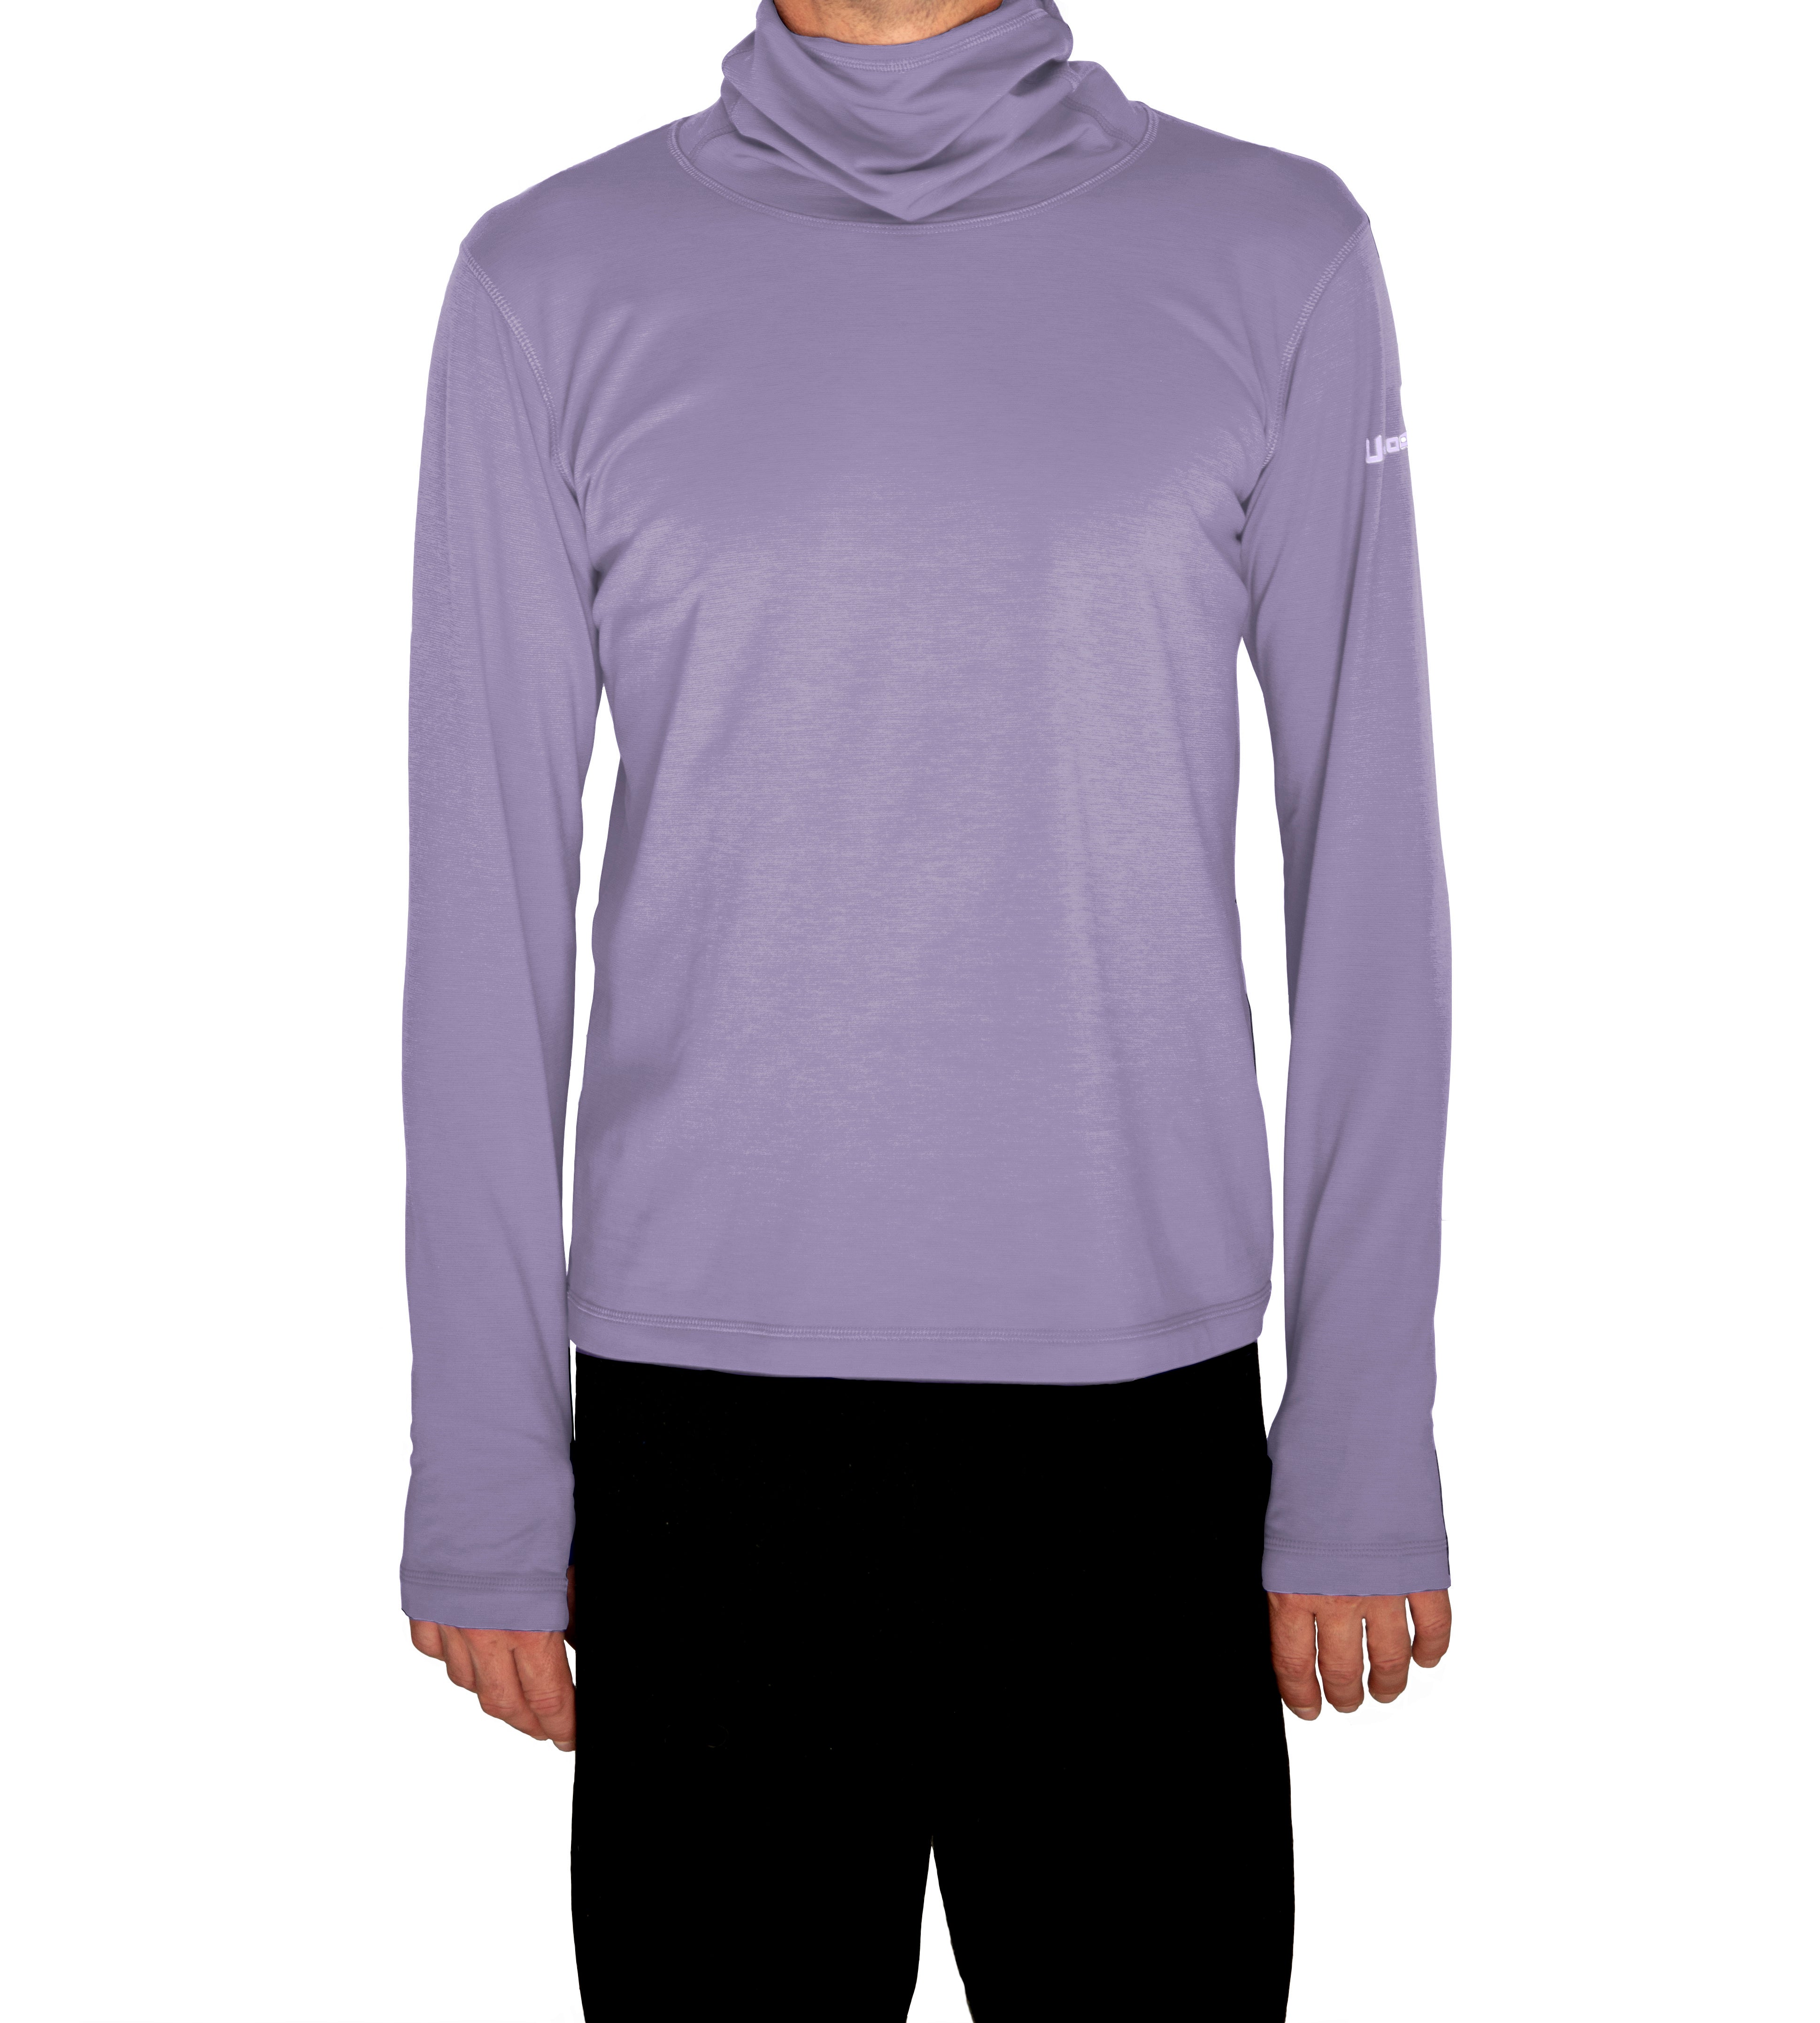 Lightweight UV Protective Shirts Now Available